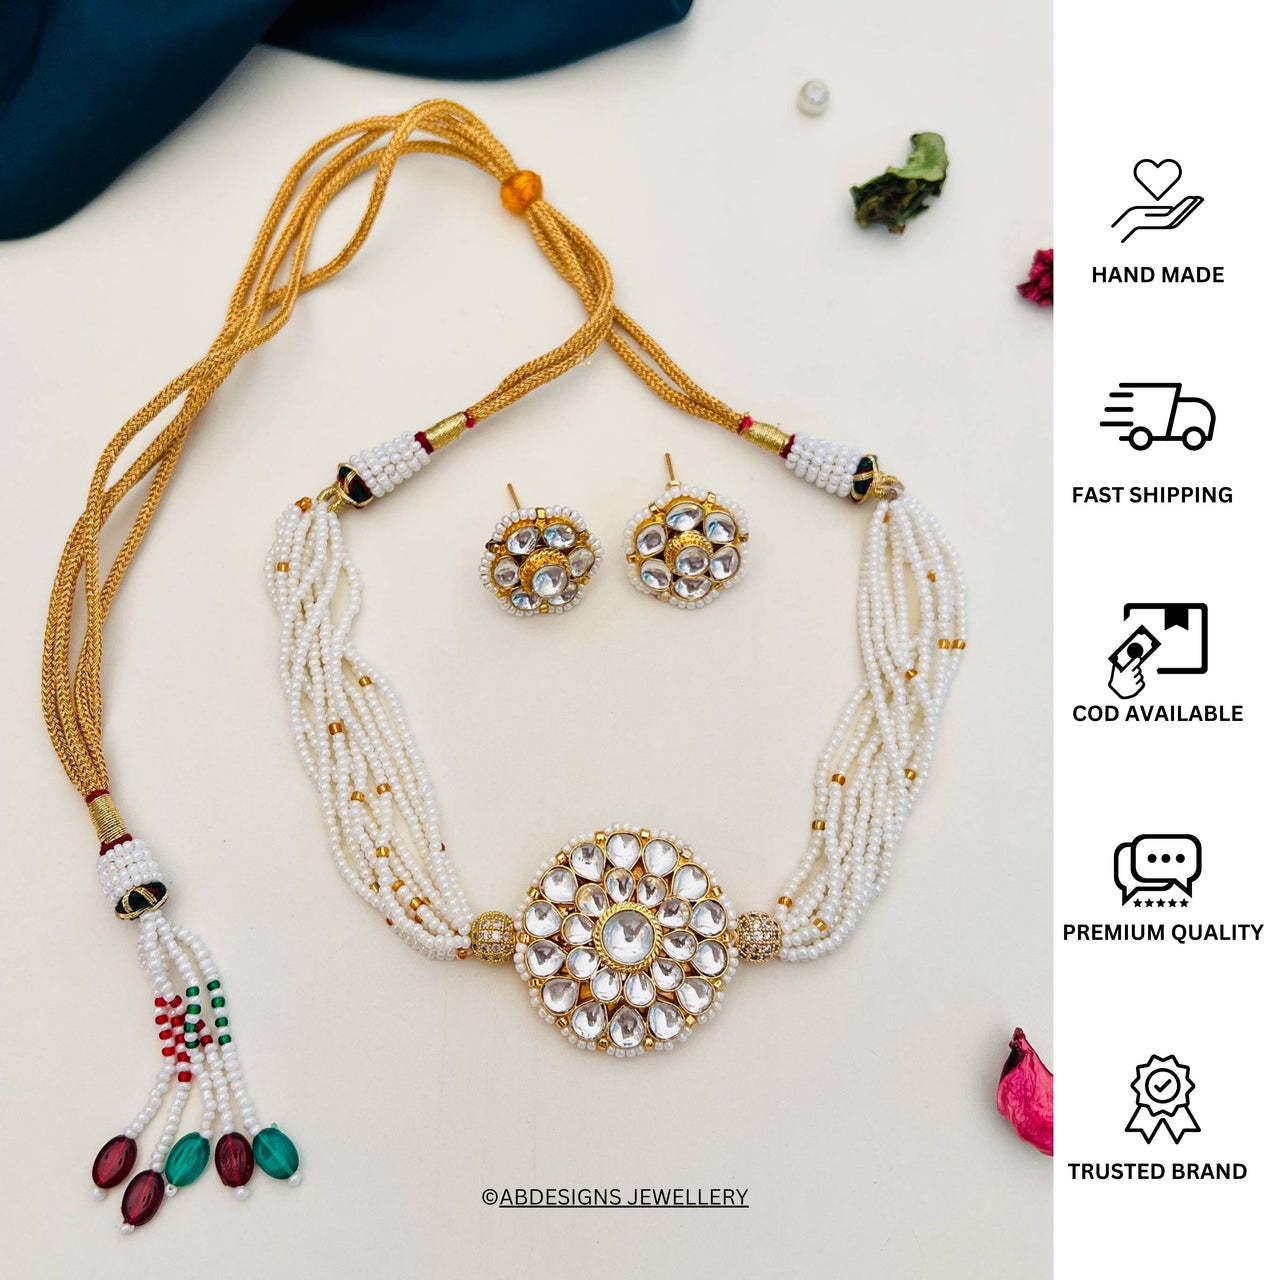 Abdesigns Jewellery Collection